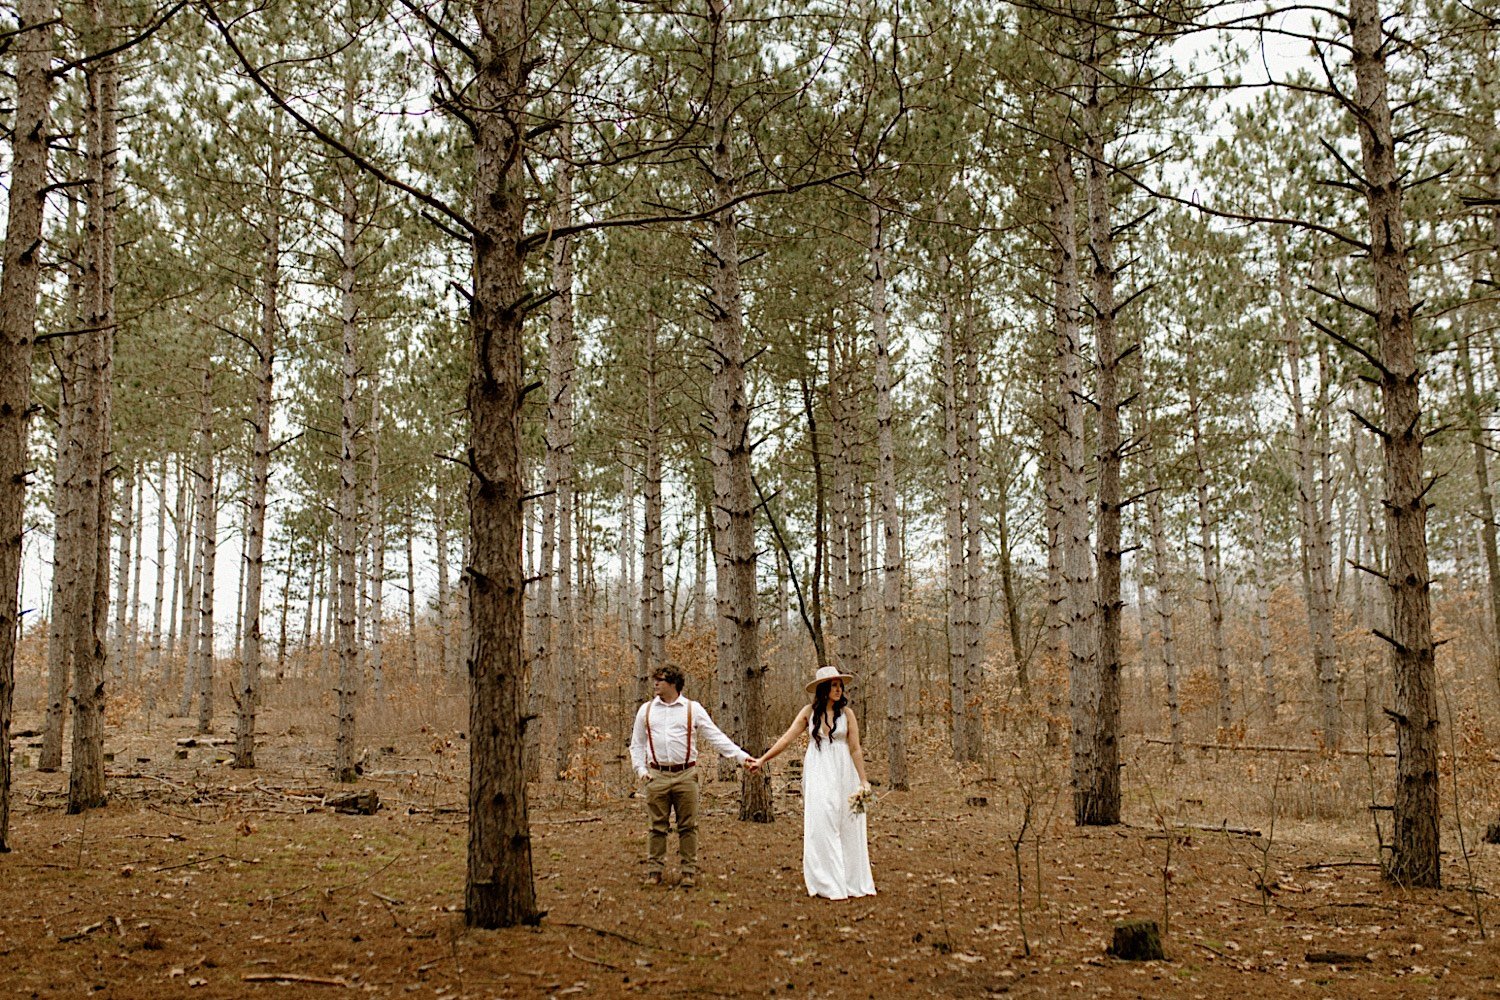 A man in a white shirt and khaki pants and a woman in a white dress and hat stand in a forest facing the camera holding hands and looking away from each other.